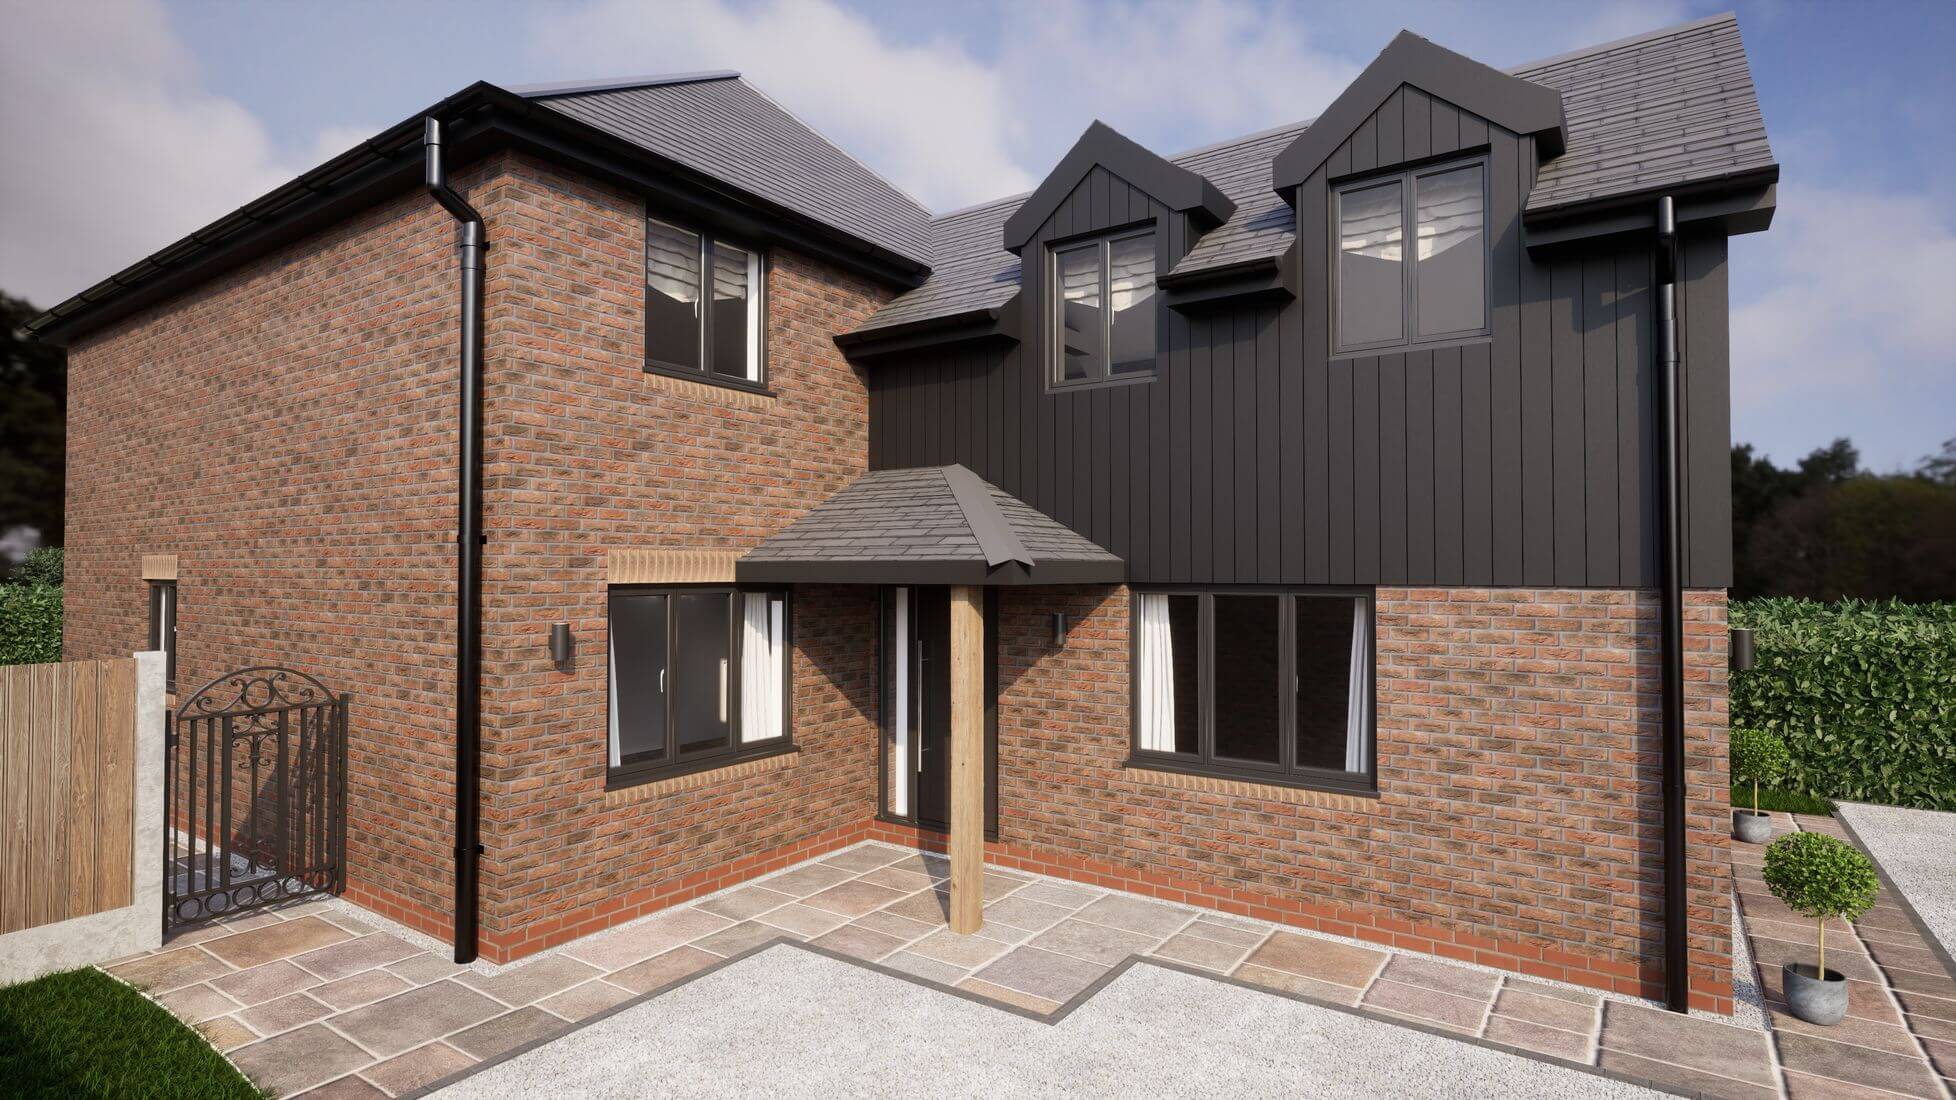 Walberton new build property design house front